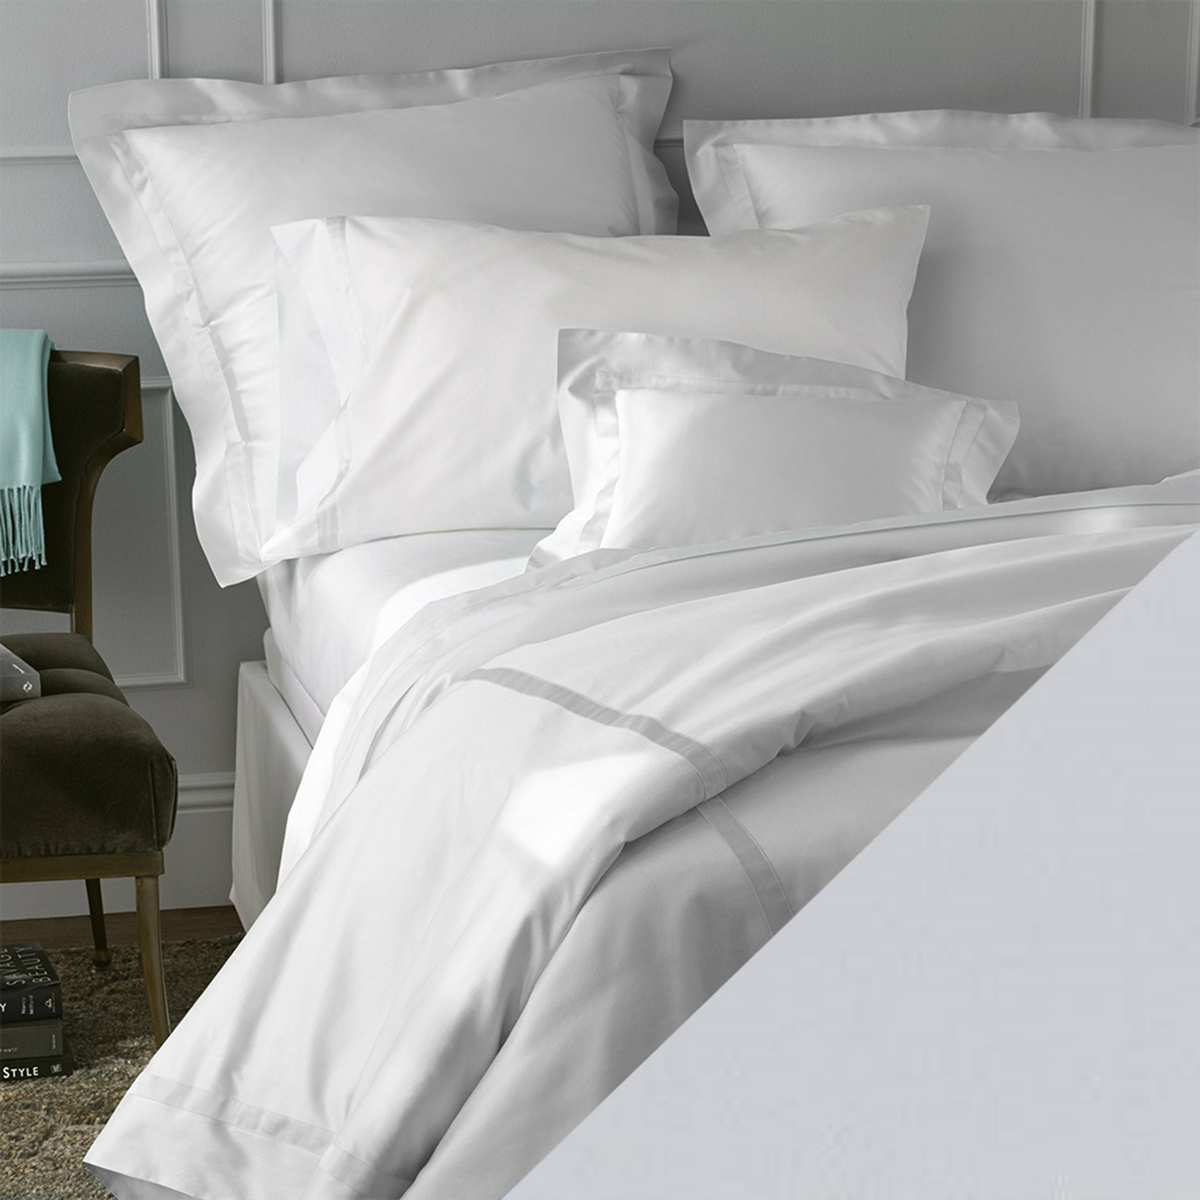 Matouk Nocturne Bedding Collection with Swatch in Dove Color